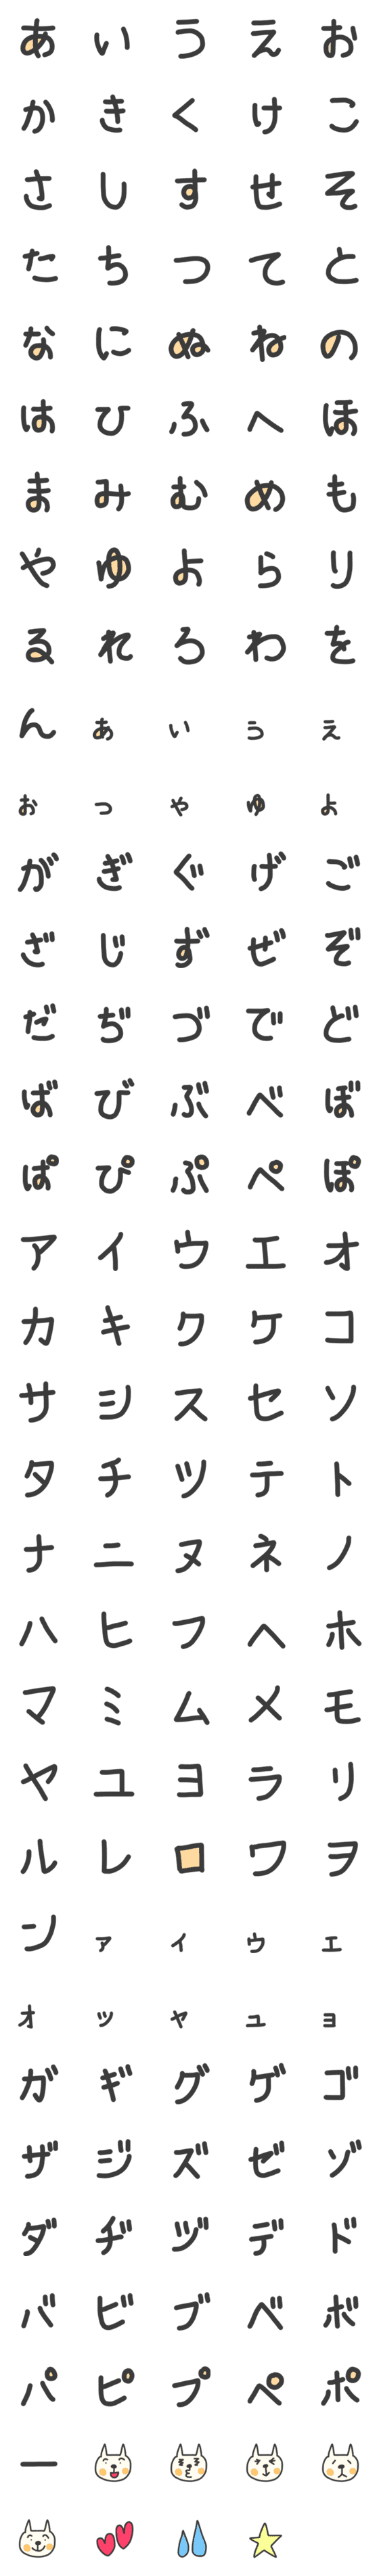 [LINE絵文字]30歳ヘタ文字★の画像一覧